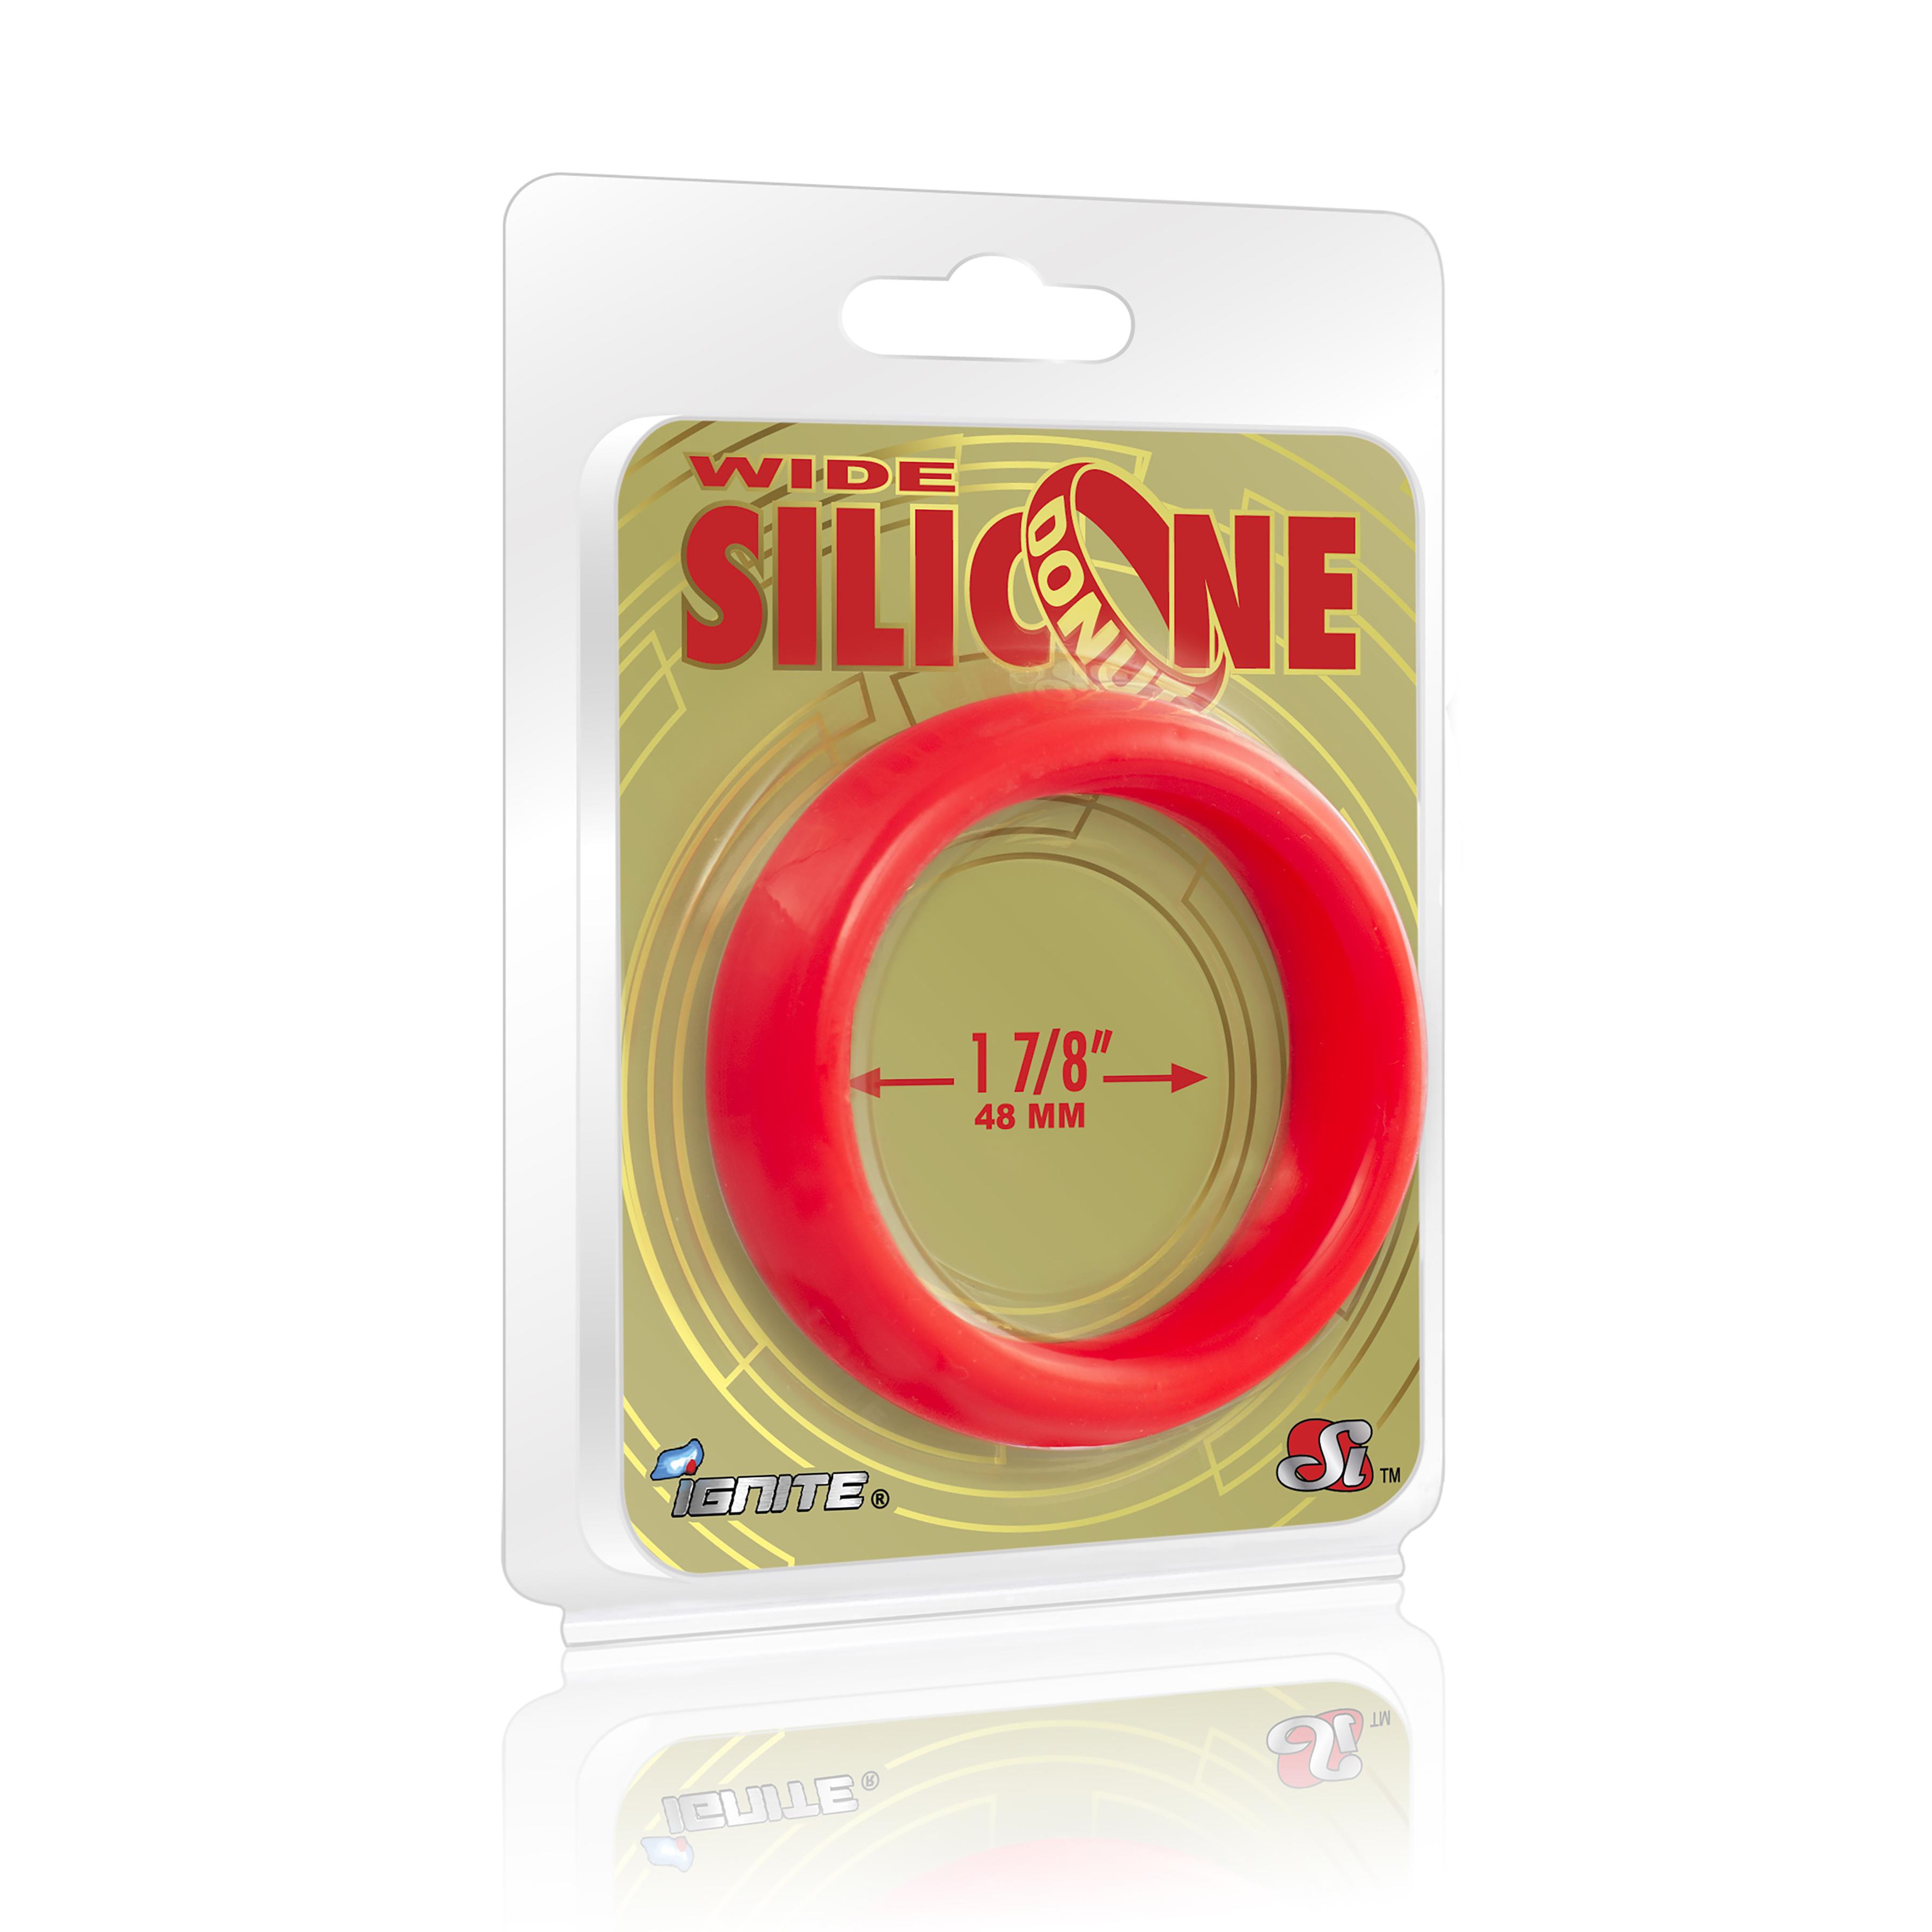 SI IGNITE Wide Silicone Donut Cockring, ¯ 48 mm, Red